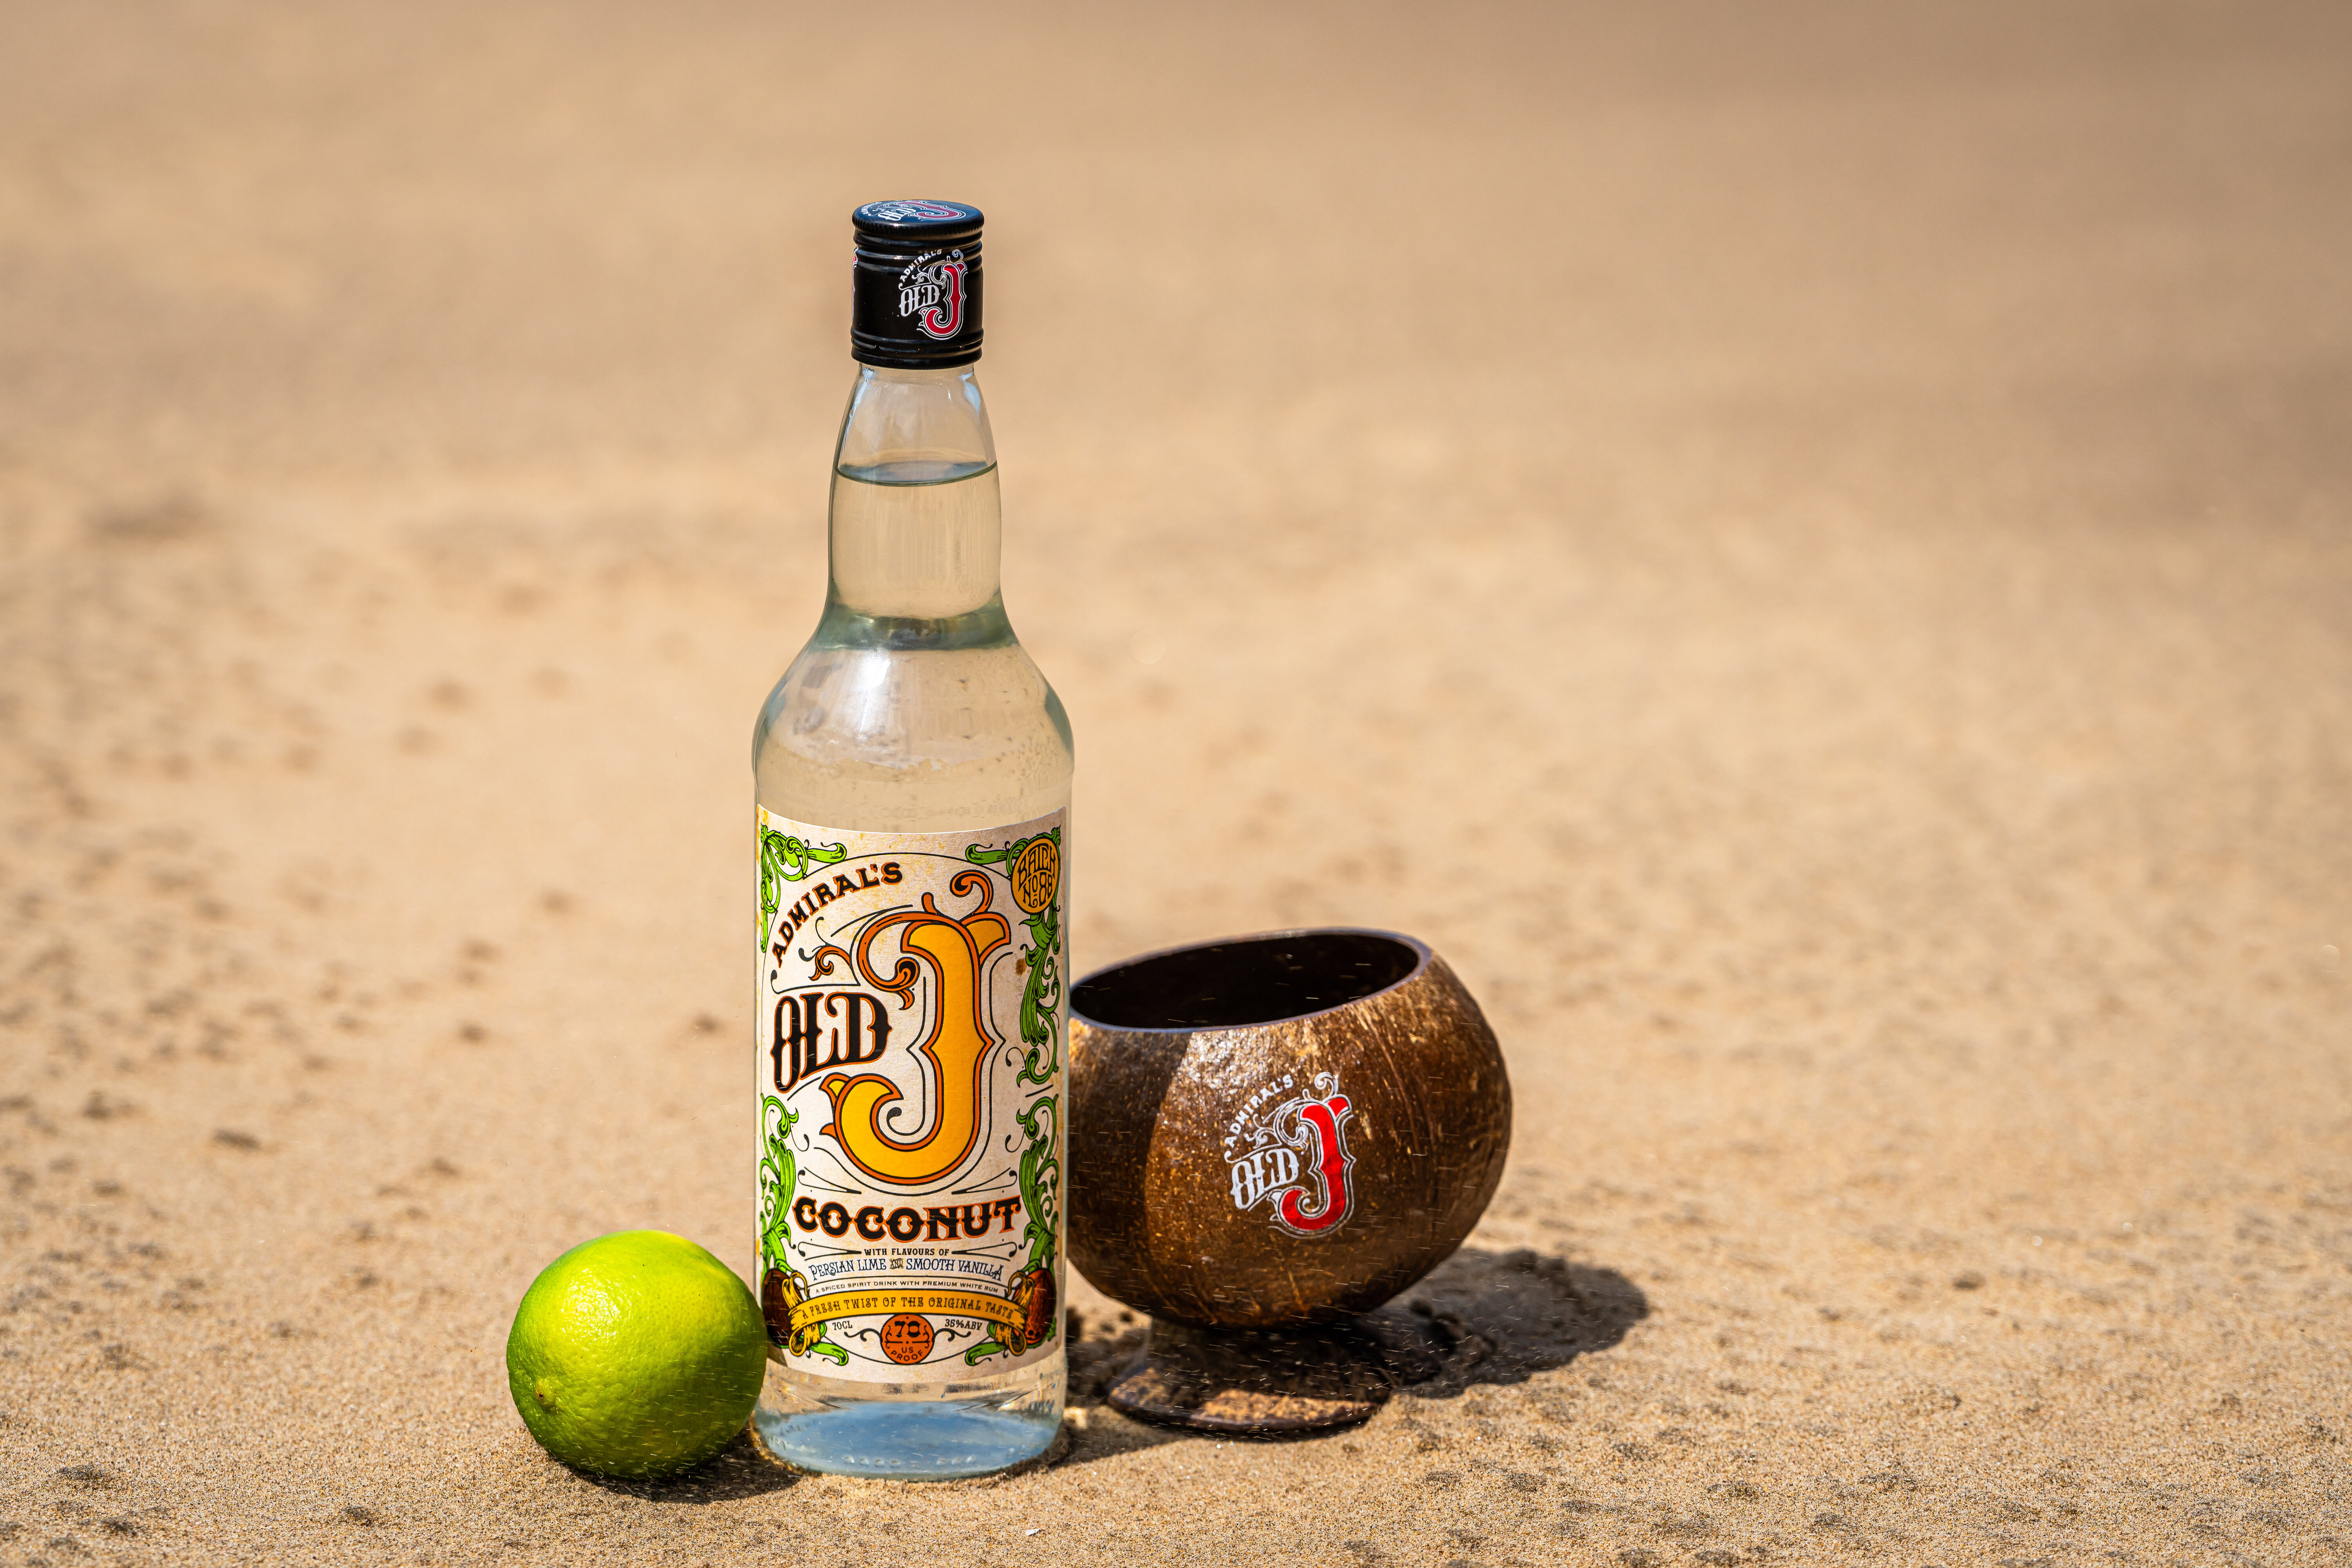 Old J Spiced Rum expands range with exotic new Coconut variant